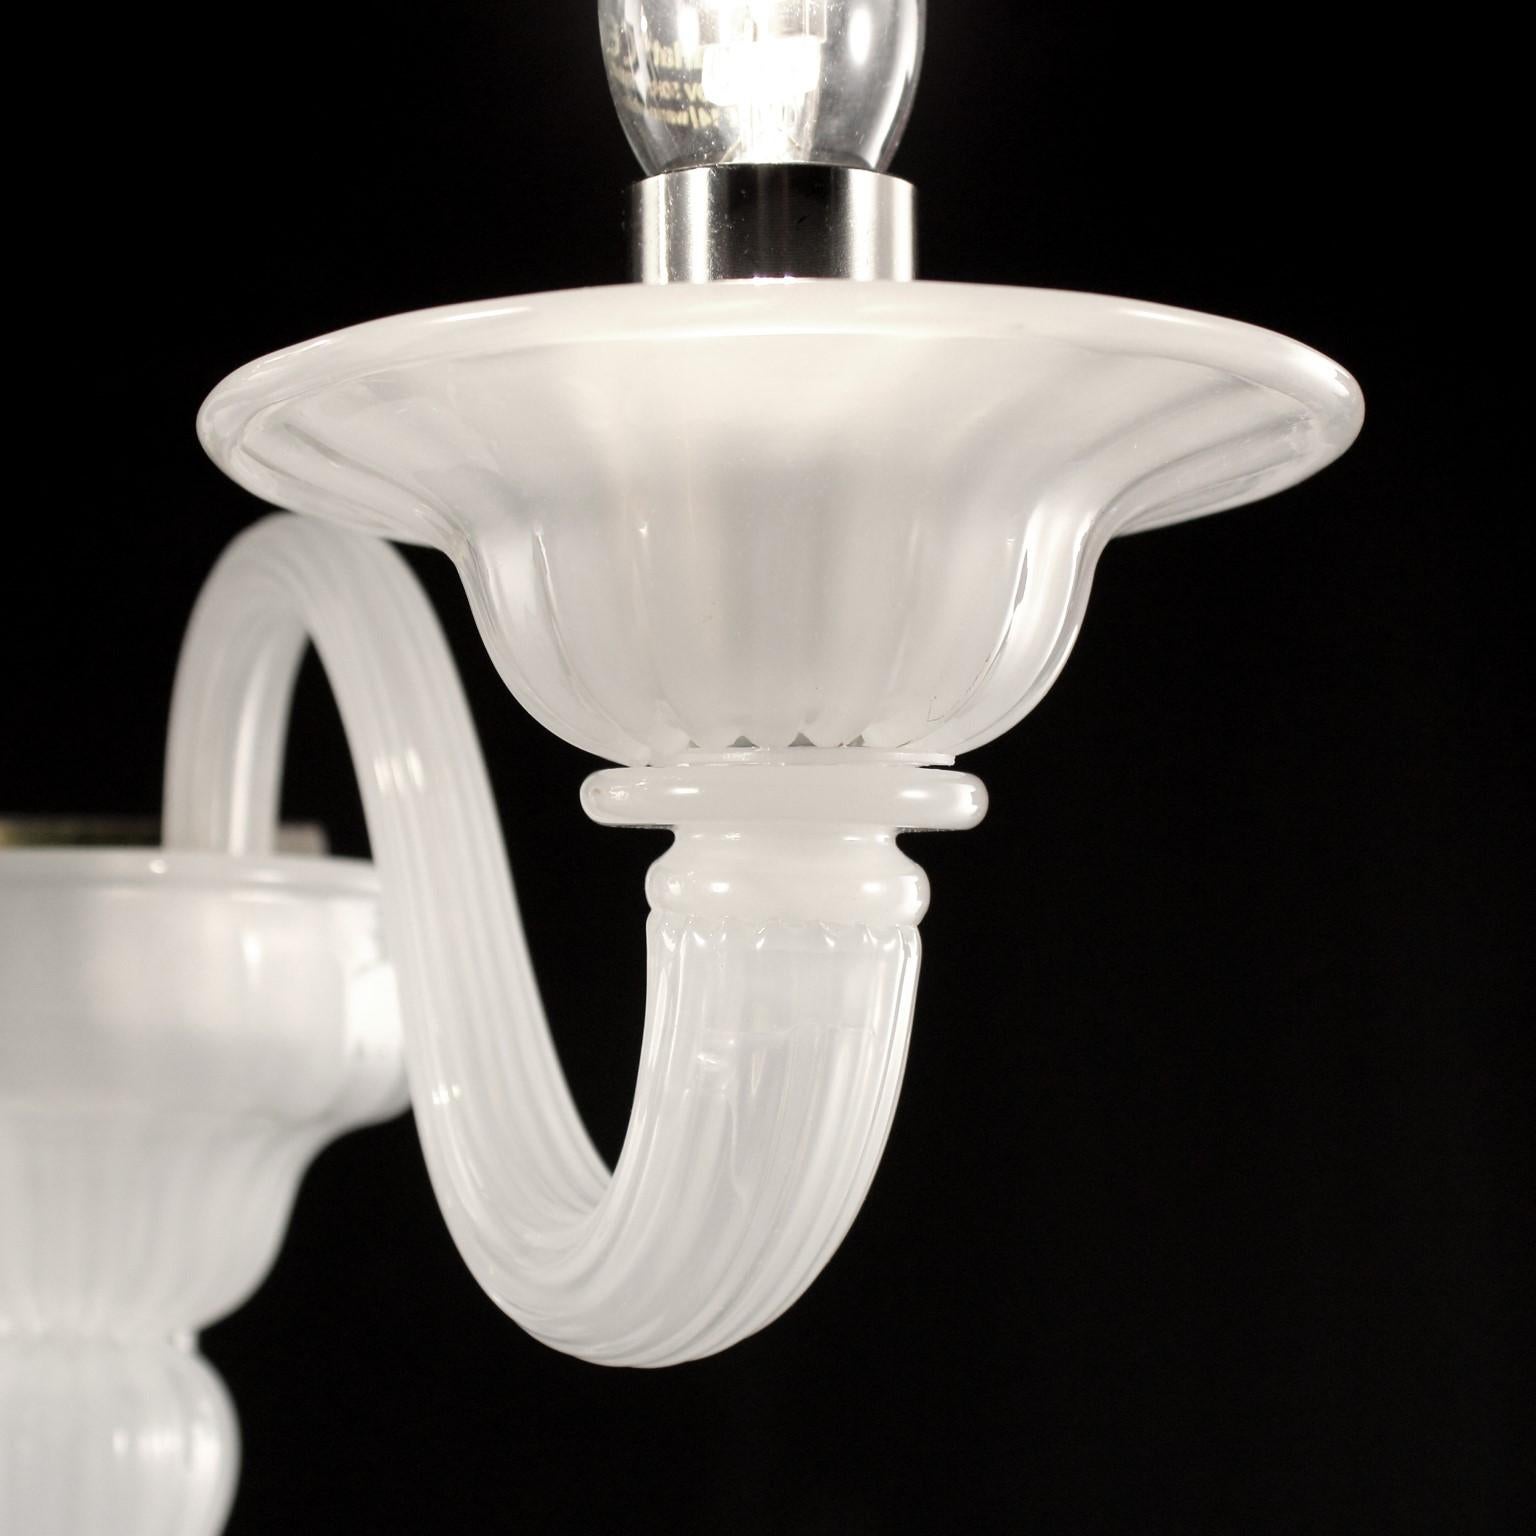 Simplicissimus 360 sconce 2 lights, in white silk artistic glass by Multiforme
This collection in Murano glass is characterized by superb simplicity. It is the result of a research which harks back to the Classic Murano chandeliers with the purpose